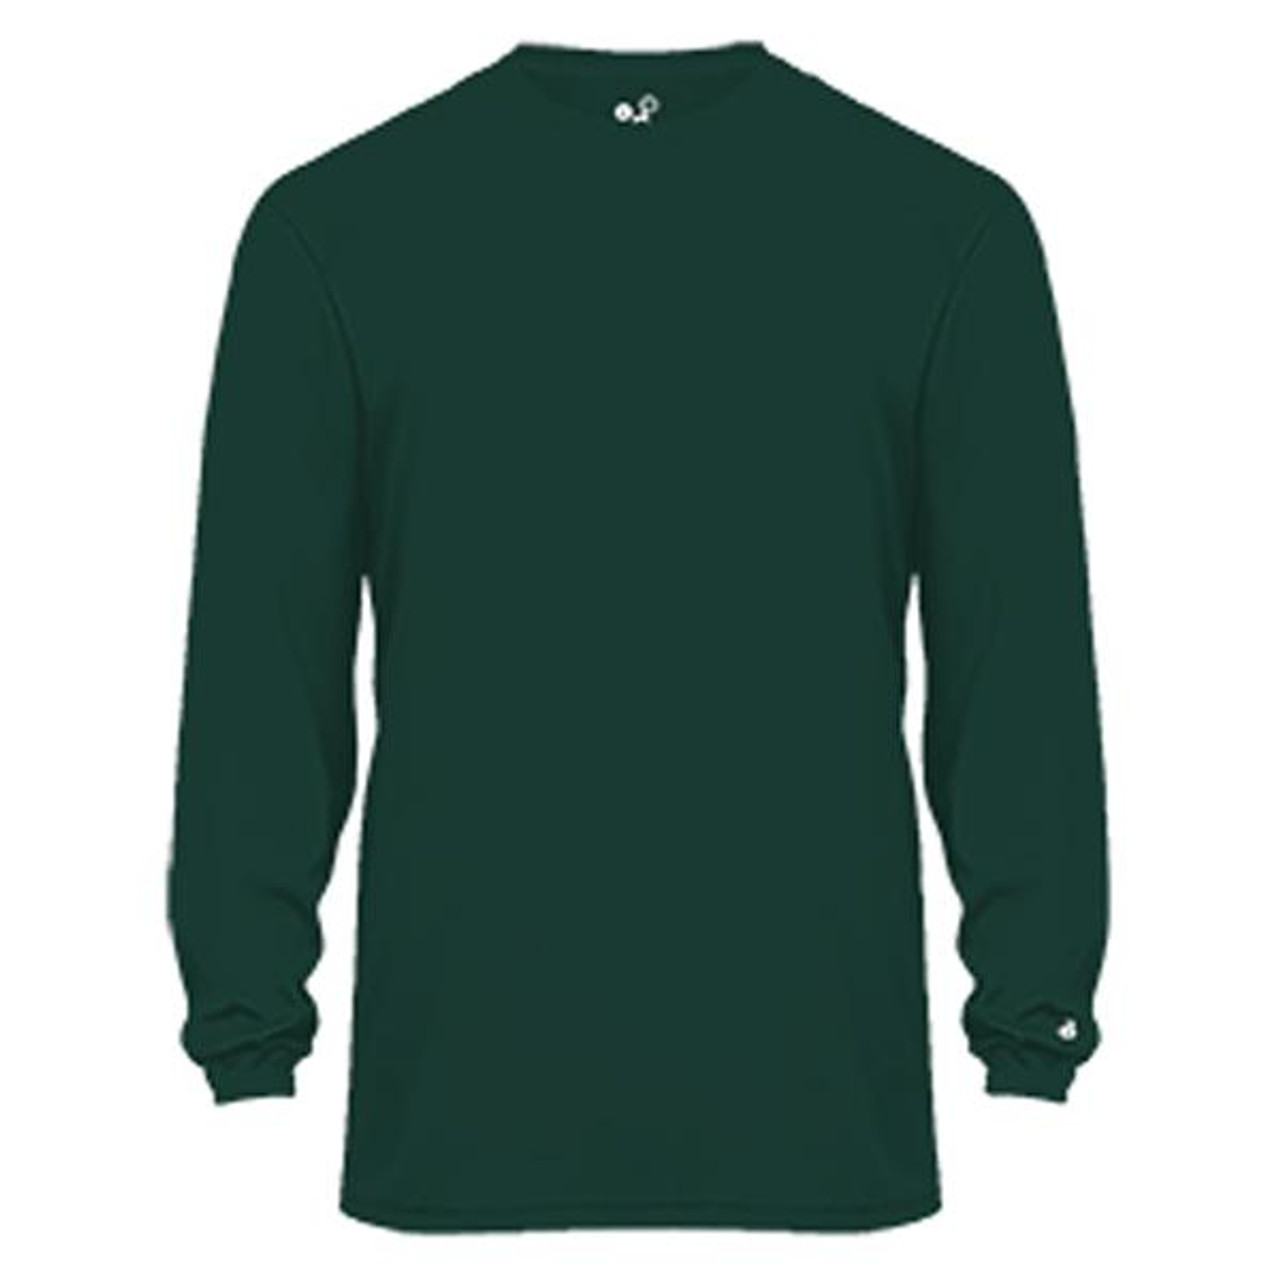 YOUTH ULTIMATE TEE L/S - Dick Pond Athletics